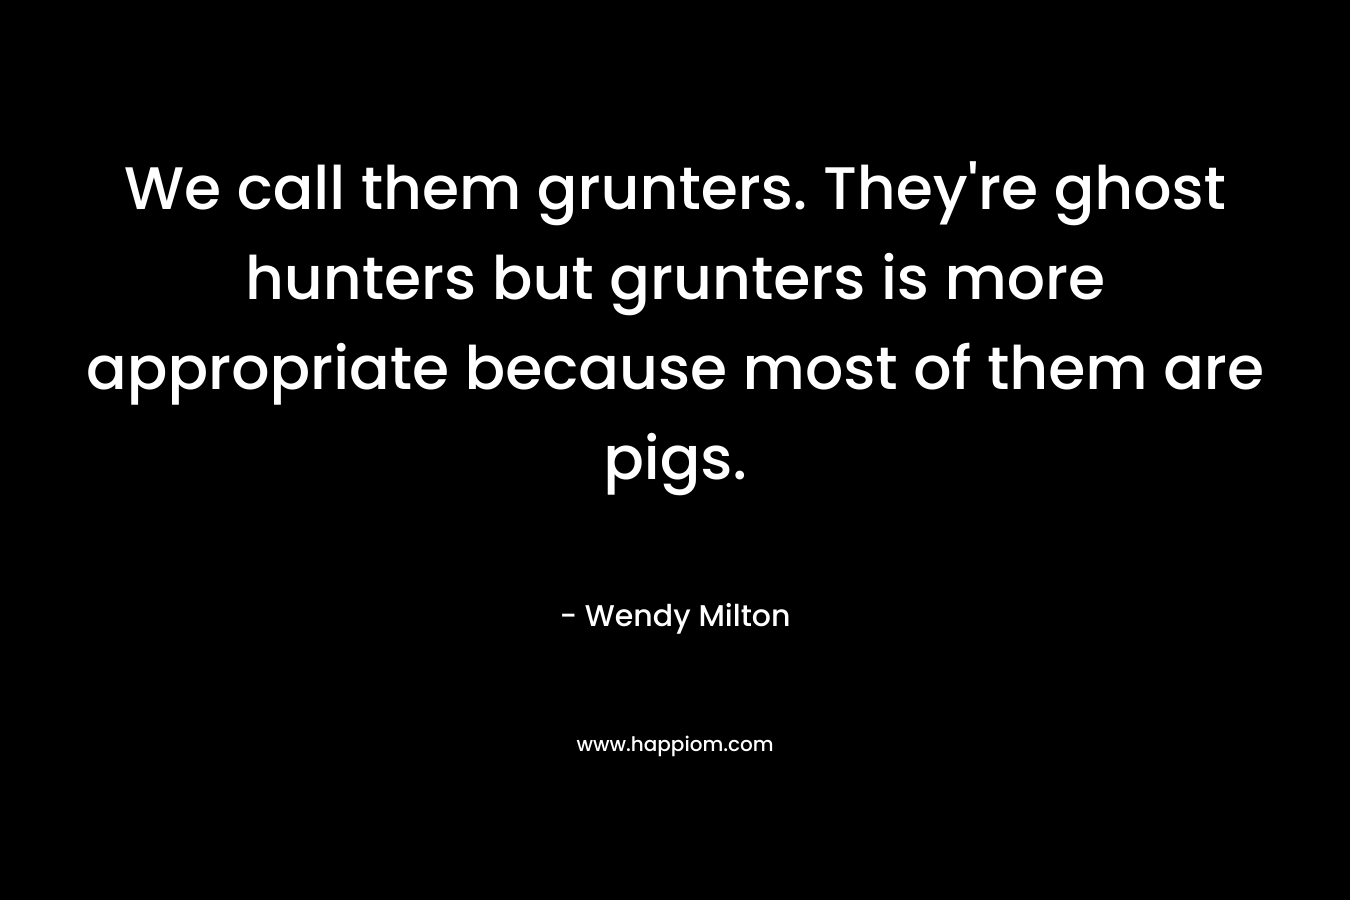 We call them grunters. They're ghost hunters but grunters is more appropriate because most of them are pigs.